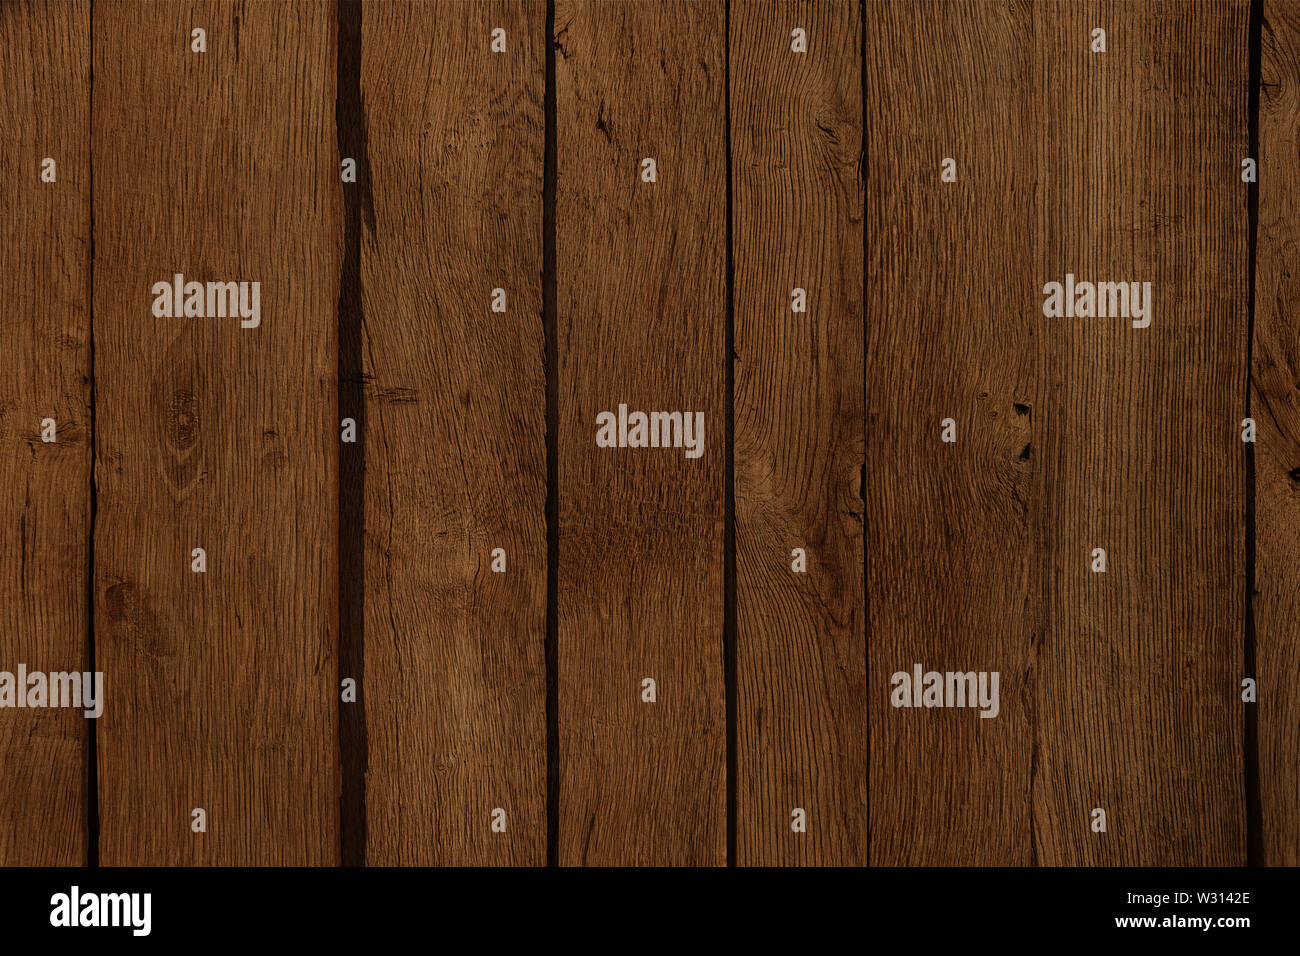 wood texture, abstract wooden background Stock Photo